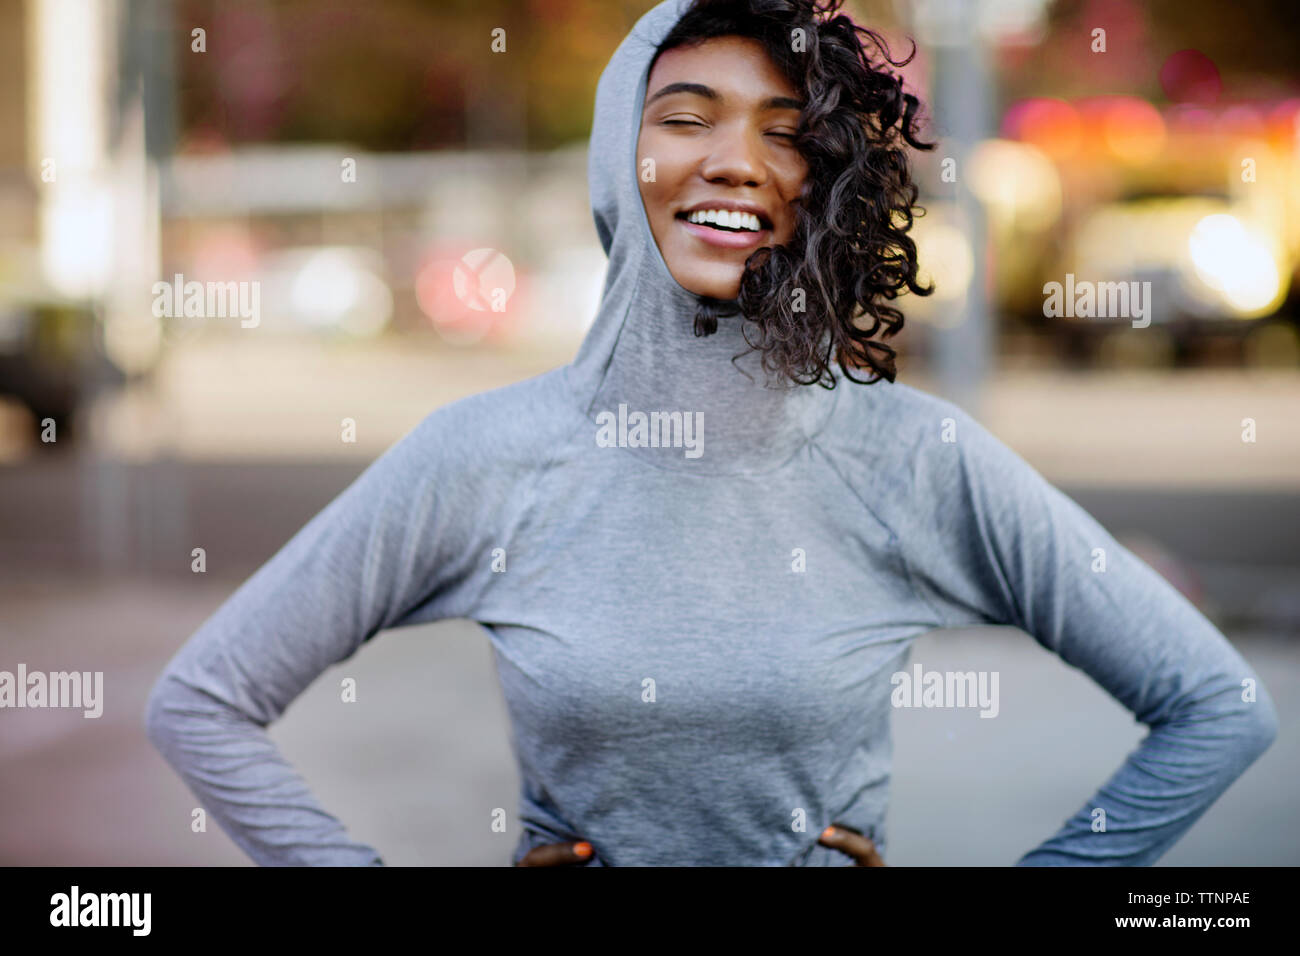 Smiling woman with hands on hips standing on street Stock Photo